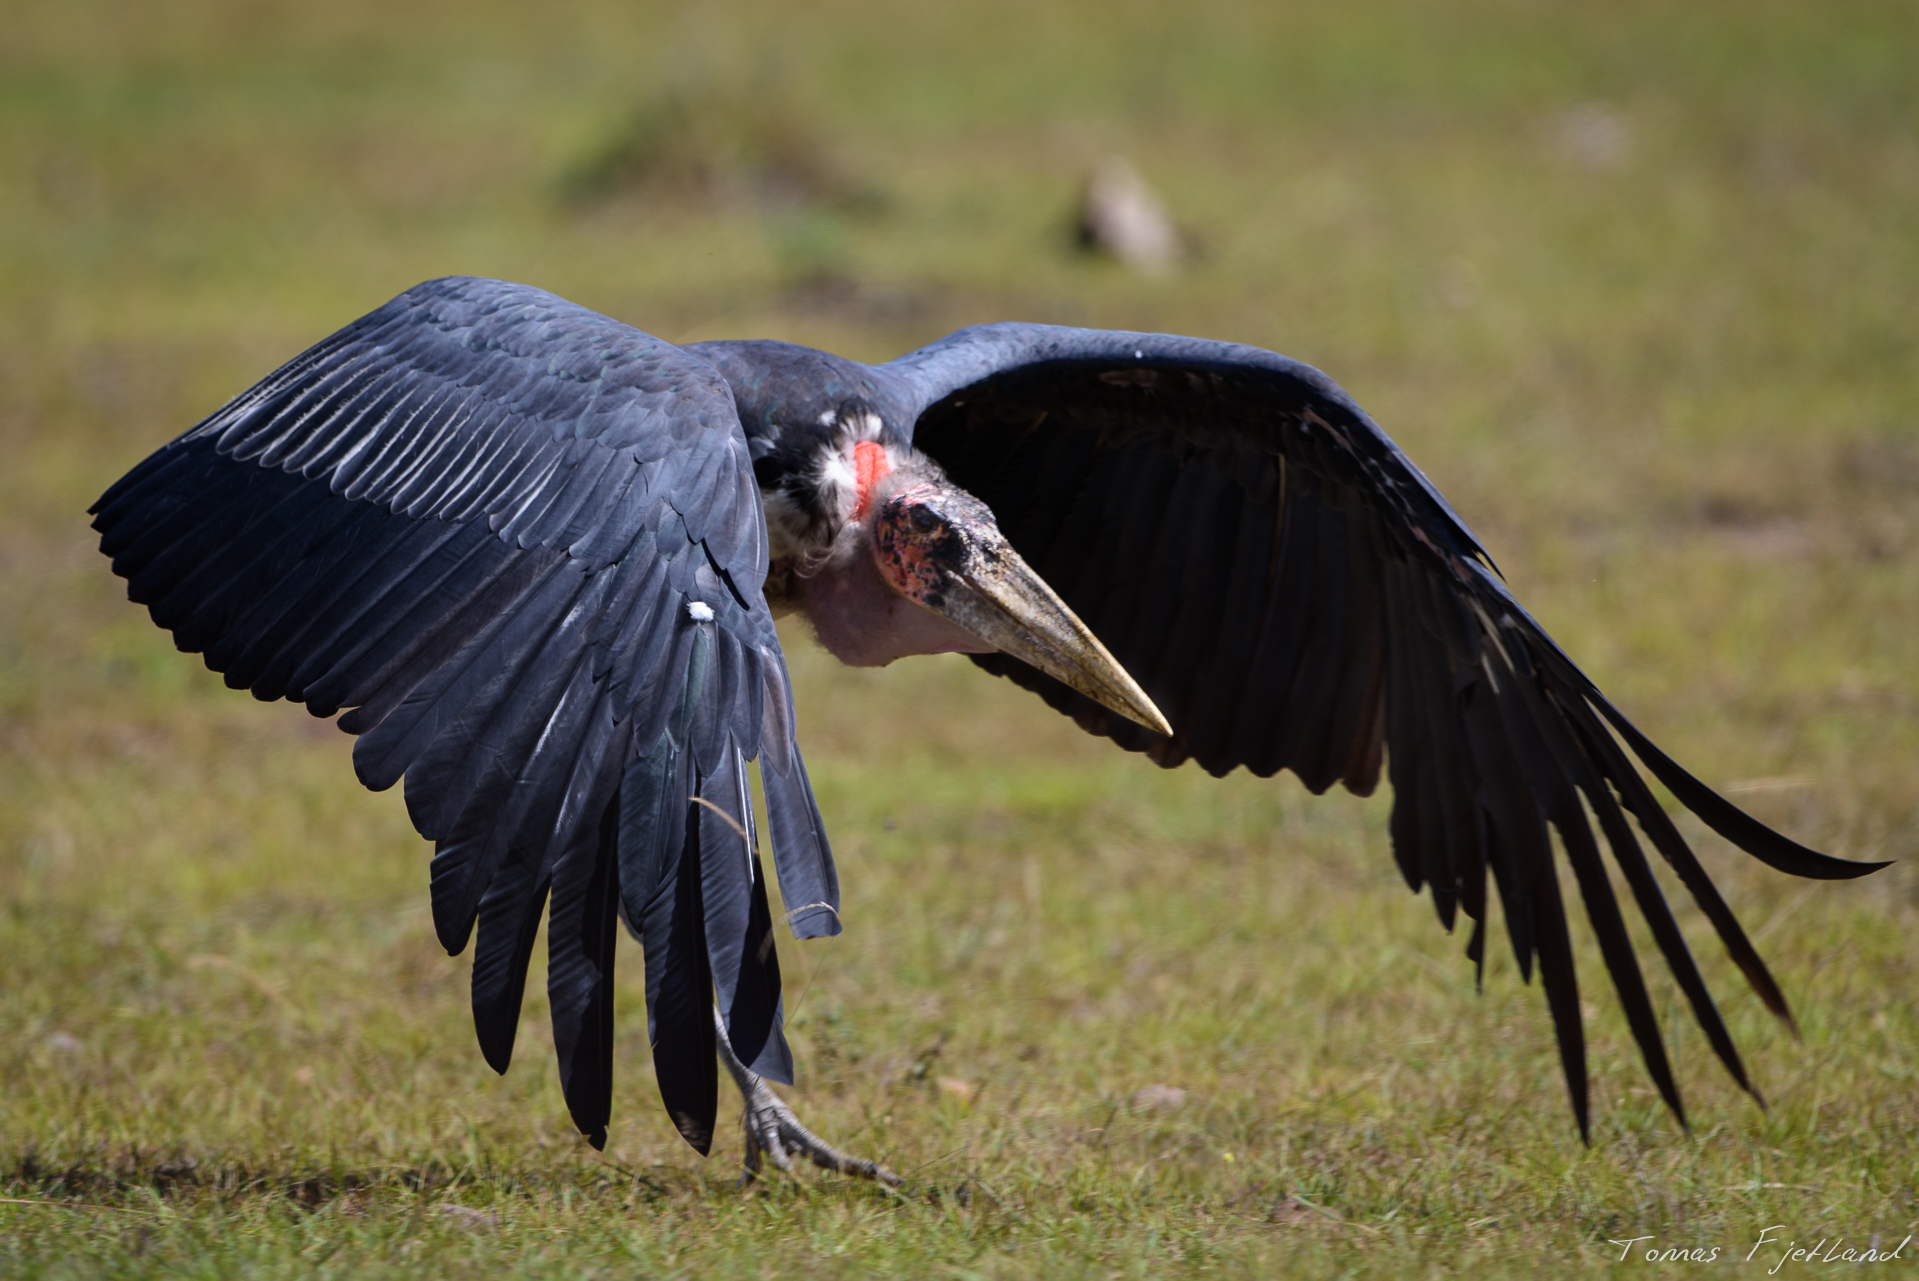 Clearly not the prettiest bird in east Africa, the Marabou is nonetheless an imposing figure, and when taking off looks quite dramatic.